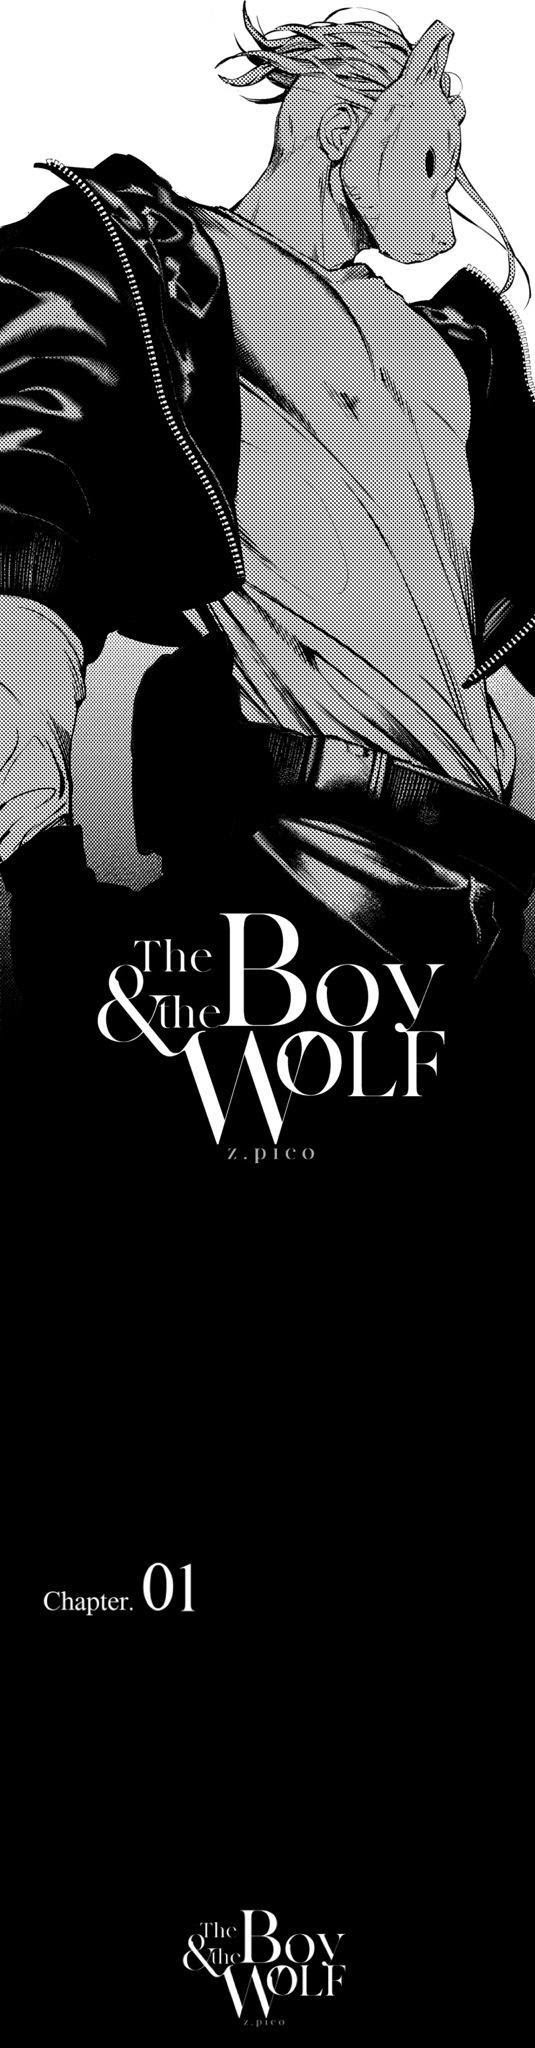 The Boy And The Wolf Bl Read The Boy And The Wolf Manga English Online [Latest Chapters] Online  Free - YaoiScan